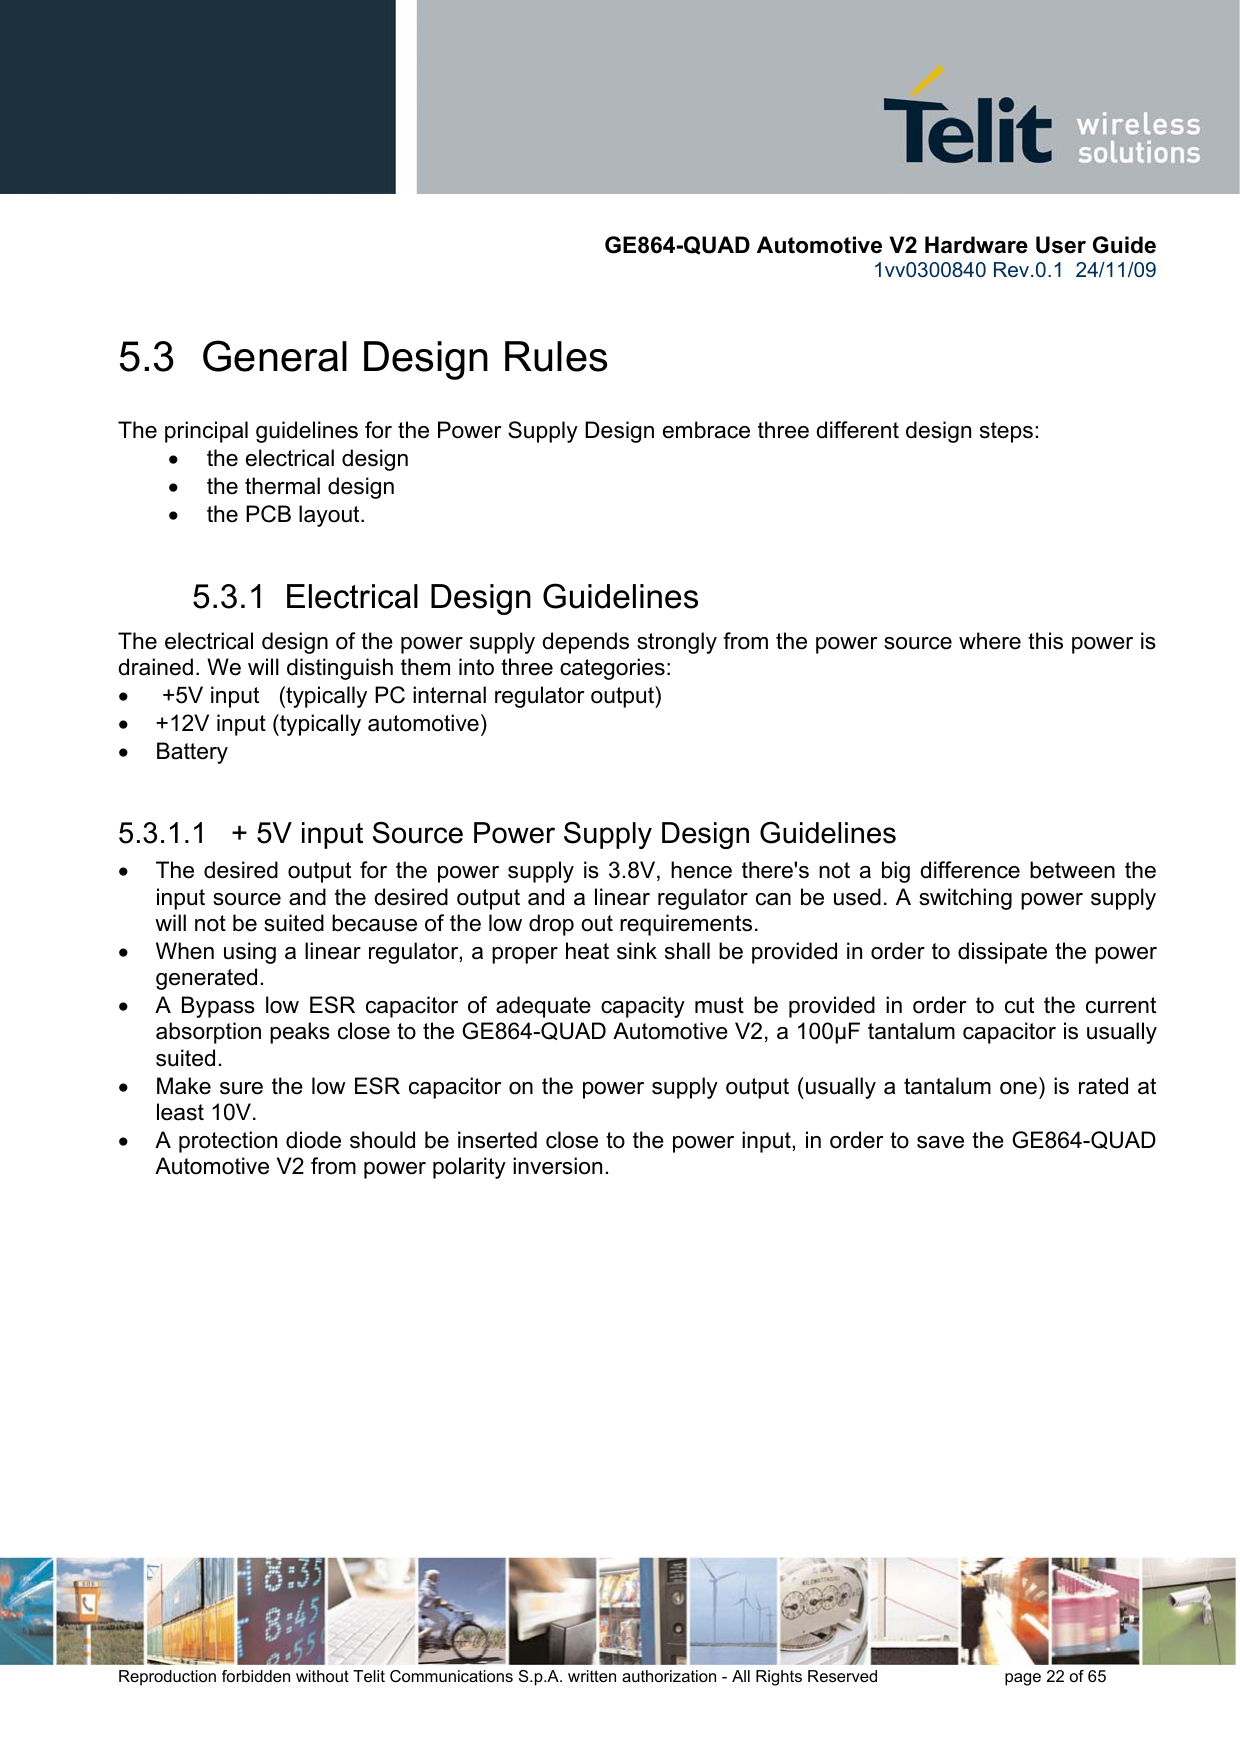       GE864-QUAD Automotive V2 Hardware User Guide 1vv0300840 Rev.0.1  24/11/09      Reproduction forbidden without Telit Communications S.p.A. written authorization - All Rights Reserved    page 22 of 65  5.3  General Design Rules The principal guidelines for the Power Supply Design embrace three different design steps: •  the electrical design •  the thermal design •  the PCB layout. 5.3.1  Electrical Design Guidelines The electrical design of the power supply depends strongly from the power source where this power is drained. We will distinguish them into three categories: •   +5V input   (typically PC internal regulator output) •  +12V input (typically automotive) • Battery  5.3.1.1   + 5V input Source Power Supply Design Guidelines •  The desired output for the power supply is 3.8V, hence there&apos;s not a big difference between the input source and the desired output and a linear regulator can be used. A switching power supply will not be suited because of the low drop out requirements. •  When using a linear regulator, a proper heat sink shall be provided in order to dissipate the power generated. •  A Bypass low ESR capacitor of adequate capacity must be provided in order to cut the current absorption peaks close to the GE864-QUAD Automotive V2, a 100μF tantalum capacitor is usually suited. •  Make sure the low ESR capacitor on the power supply output (usually a tantalum one) is rated at least 10V. •  A protection diode should be inserted close to the power input, in order to save the GE864-QUAD Automotive V2 from power polarity inversion. 